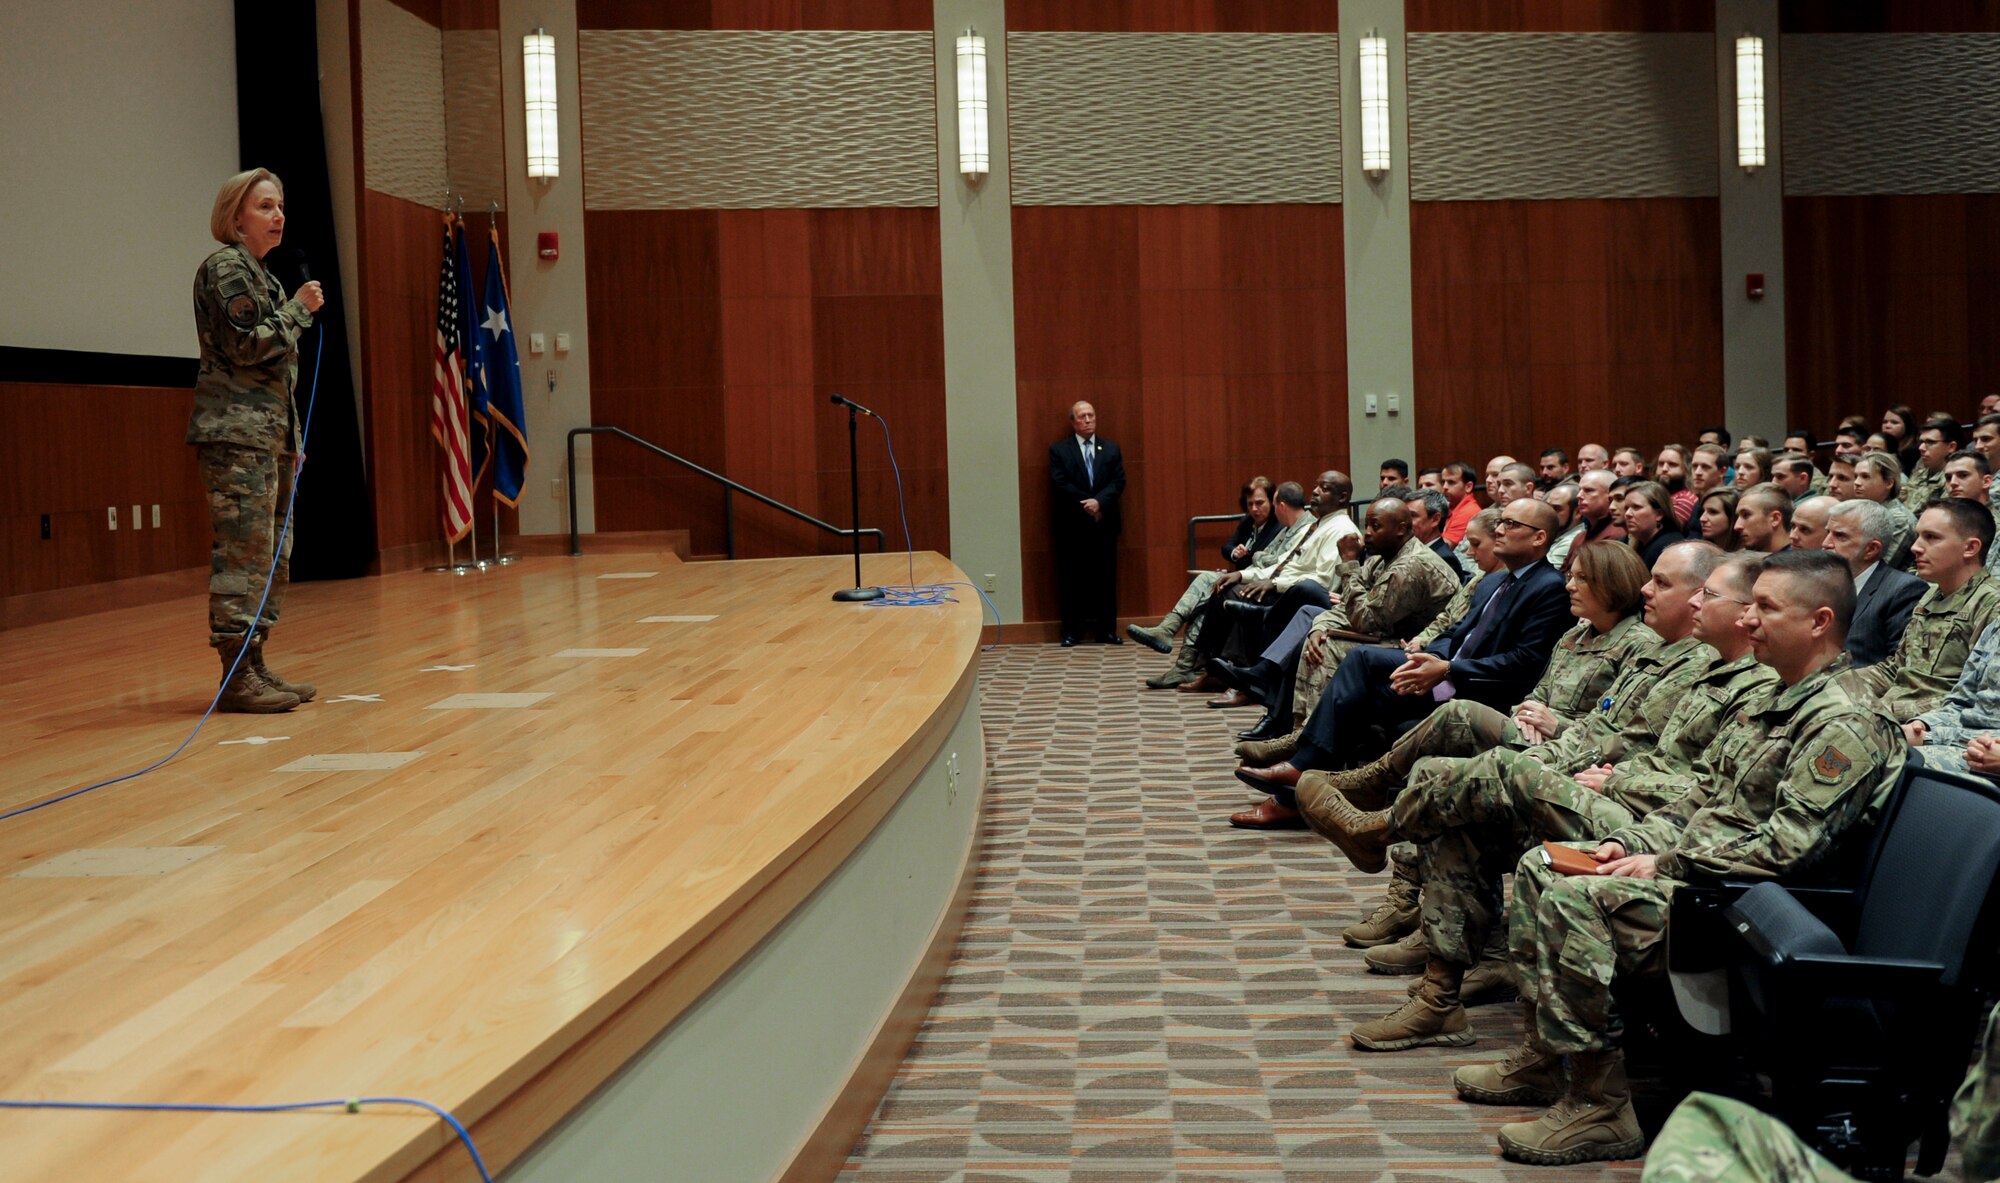 Lt. Gen. VeraLinn “Dash” Jamieson, Deputy Chief of Staff for Intelligence, Surveillance, Reconnaissance and Cyber Effects Operations, addresses members of the National Air and Space Intelligence Center here Oct. 17, 2019. NASIC is a field operating agency that reports directly to HAF A2/6. (U.S. Air Force photo by Senior Airman Samuel Earick)